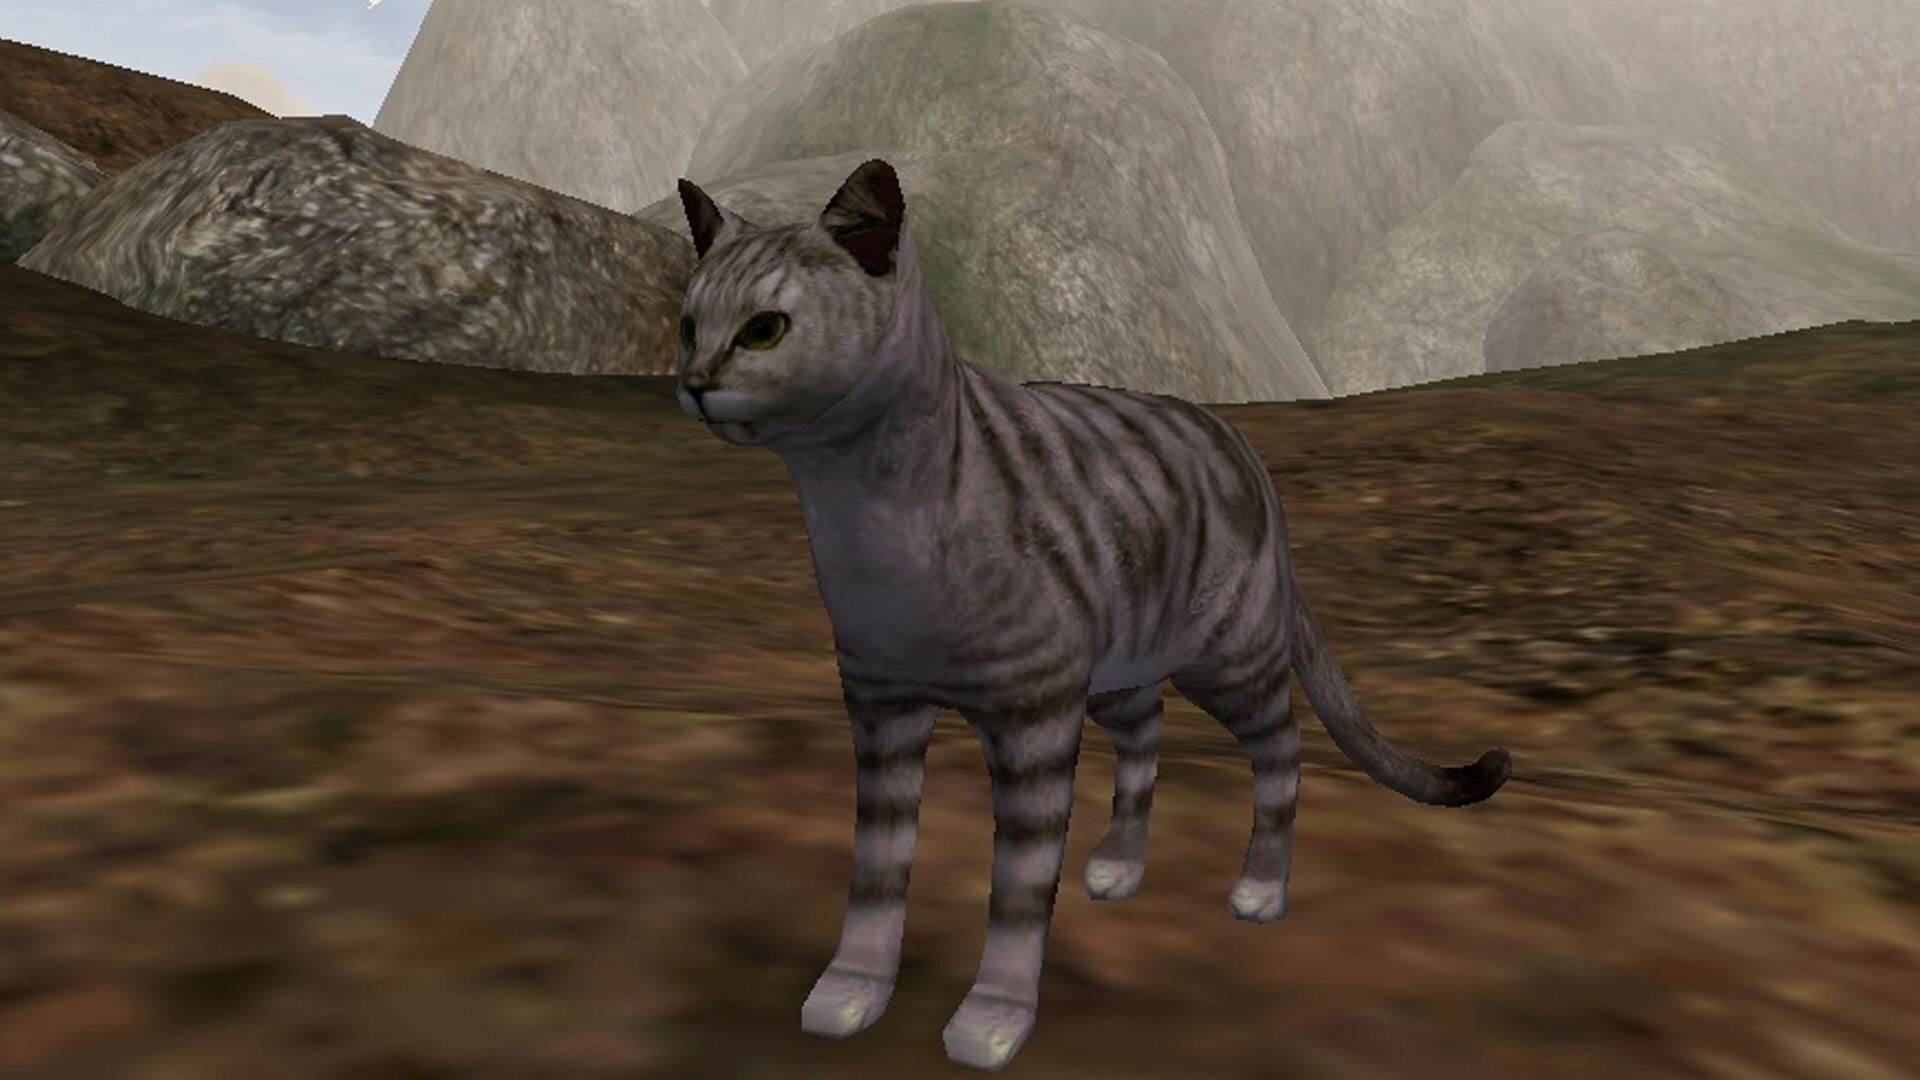 Let a tabby cat protect you in Elder Scrolls: Morrowind with this adorable new mod